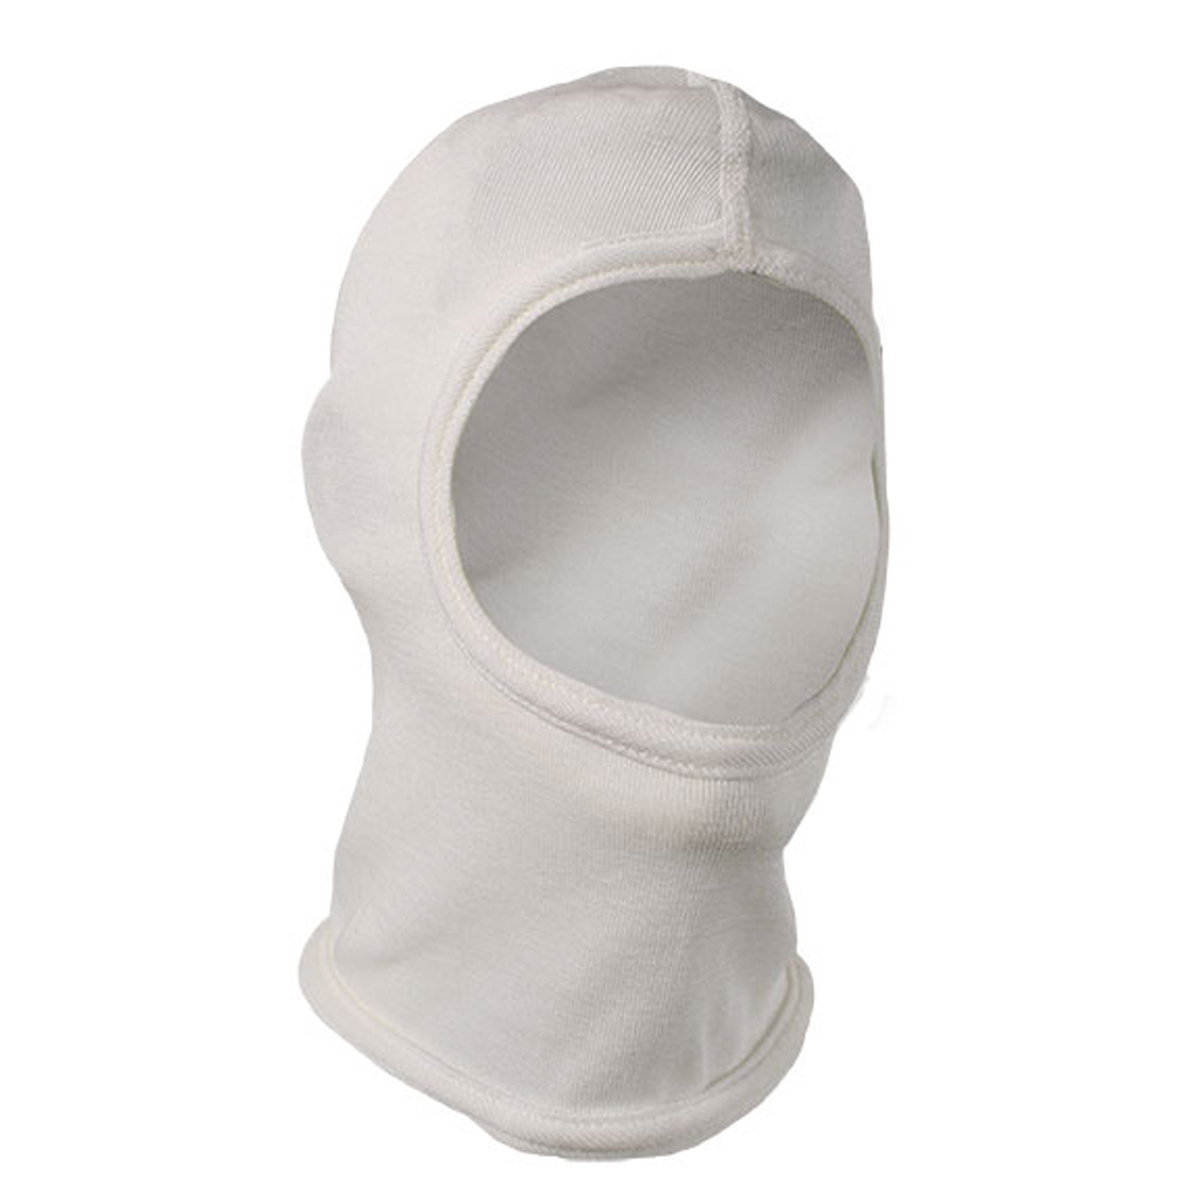 National Safety Apparel White DuPont™ Nomex® High Heat Knit Short Style Flame Resistant Balaclava